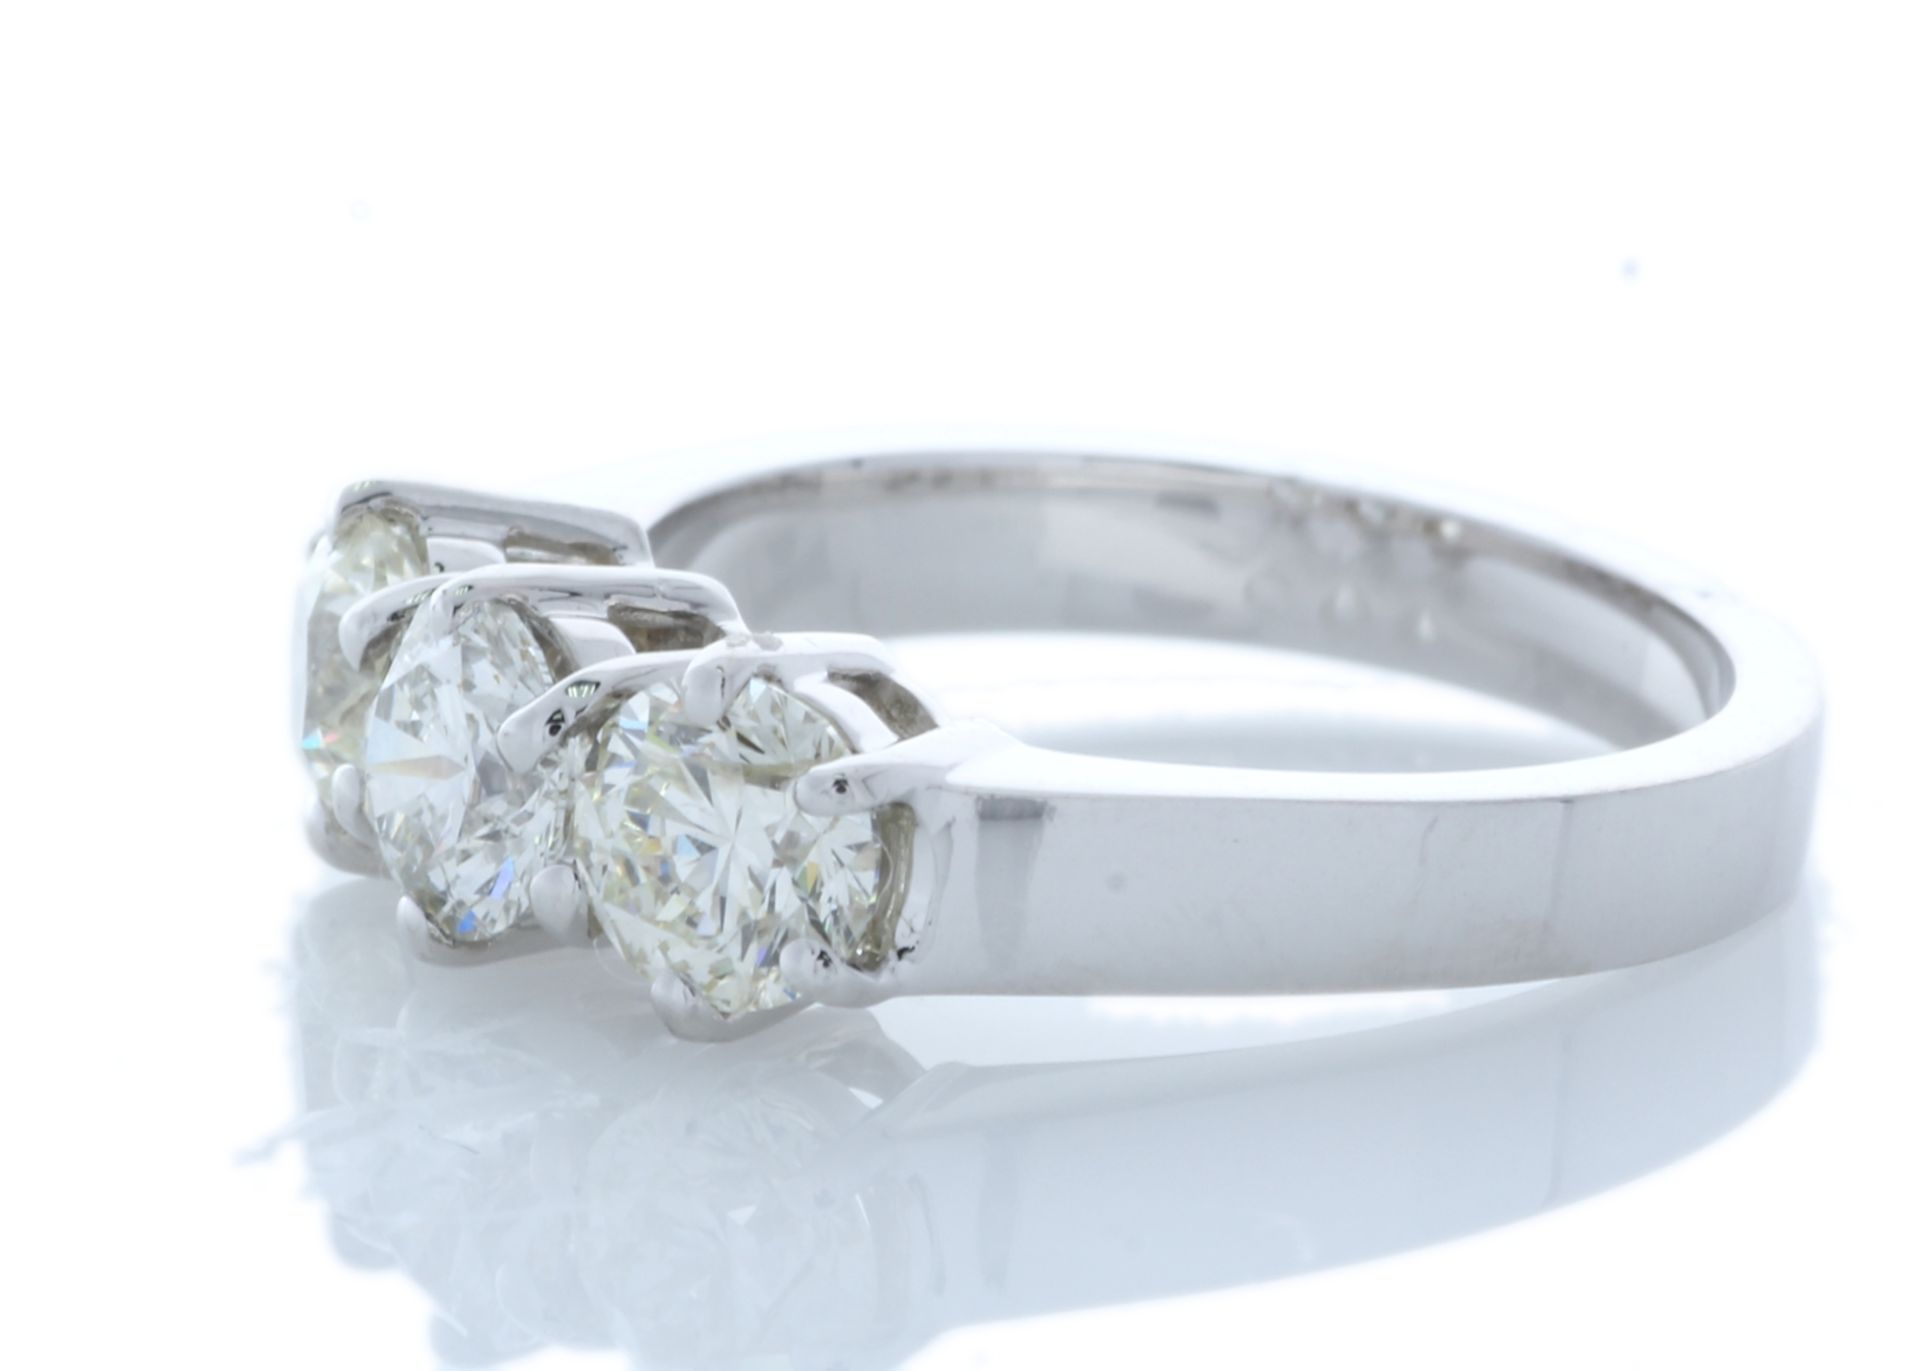 18ct White Gold Three Stone Claw Set Diamond Ring 1.52 Carats - Valued by GIE £14,595.00 - 18ct - Image 2 of 5